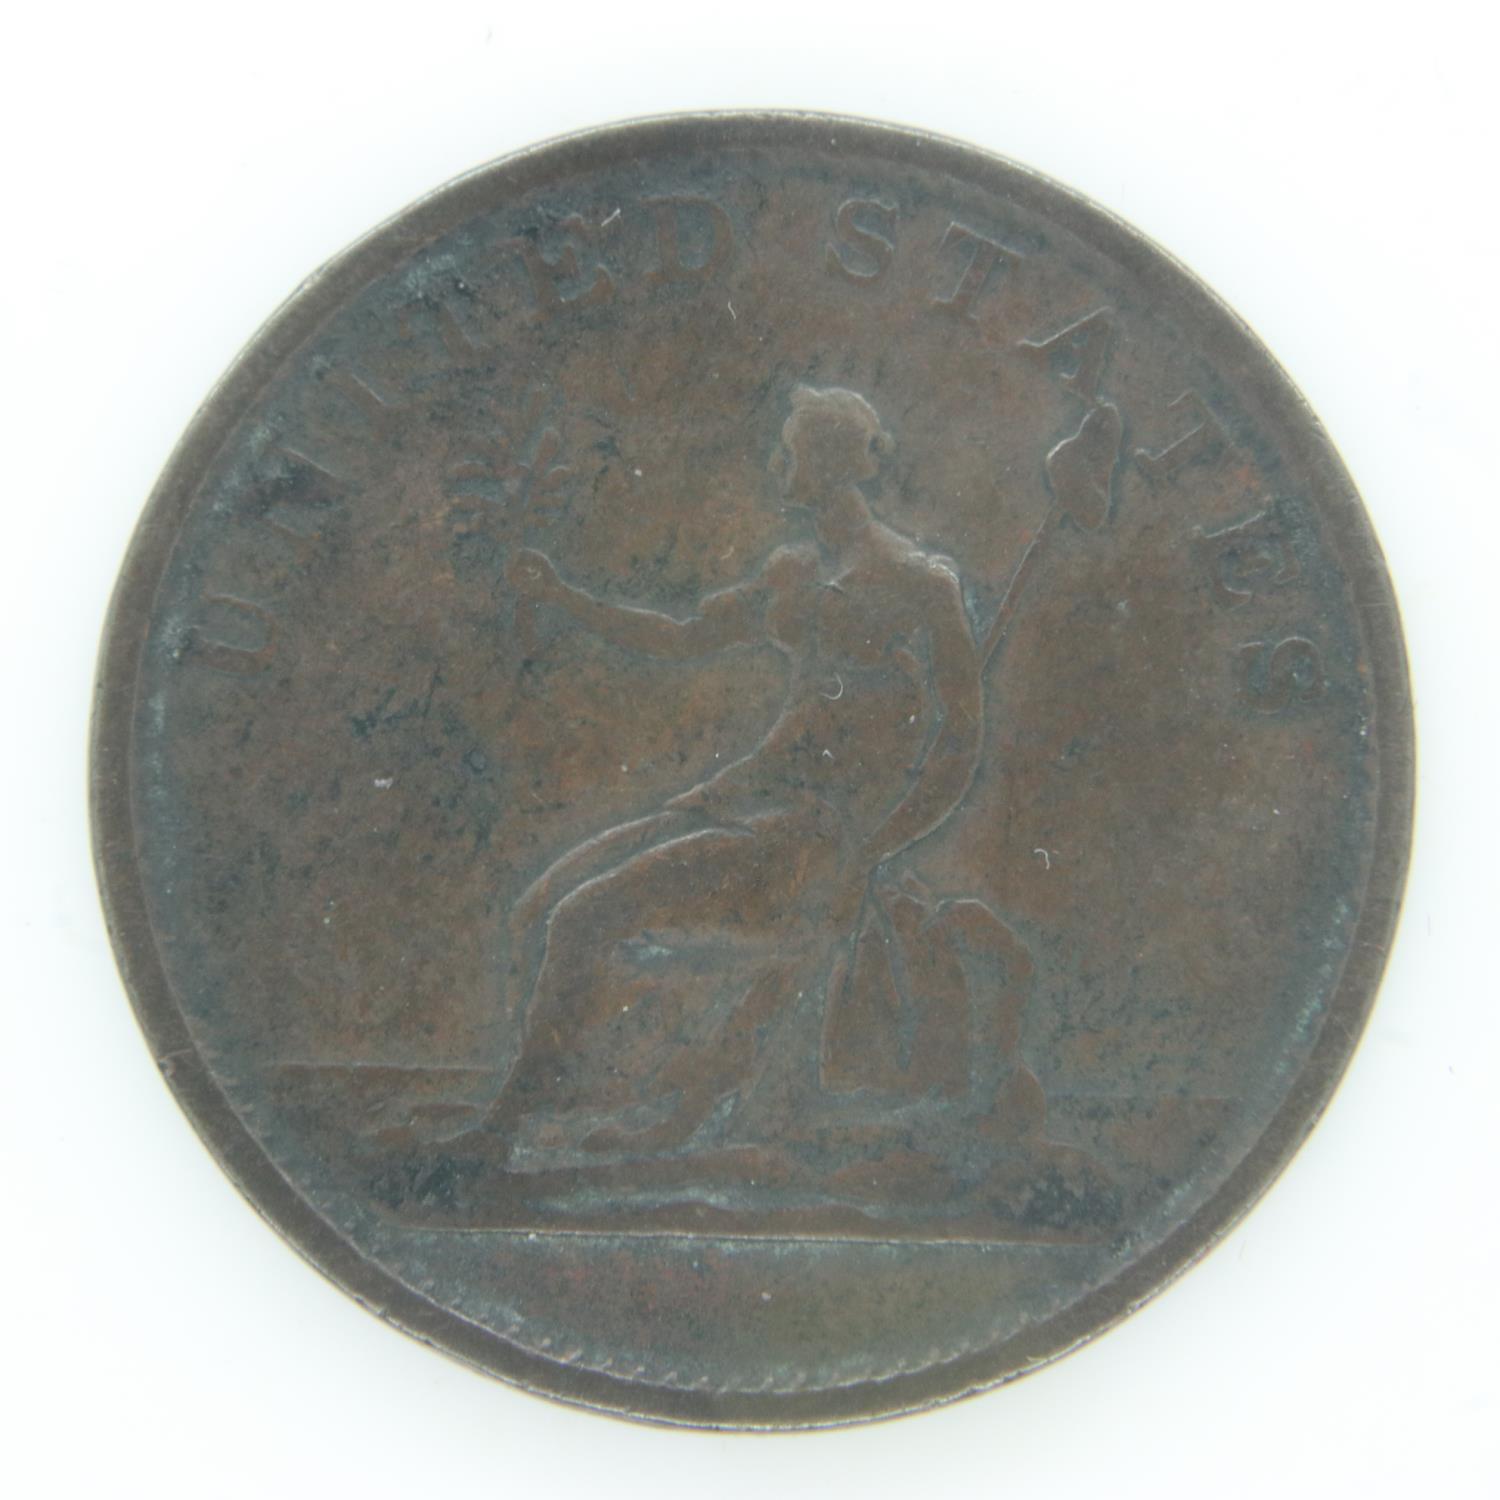 Early USA interest: 1783 Washington Independence colonial coin - VF grade. UK P&P Group 0 (£6+VAT